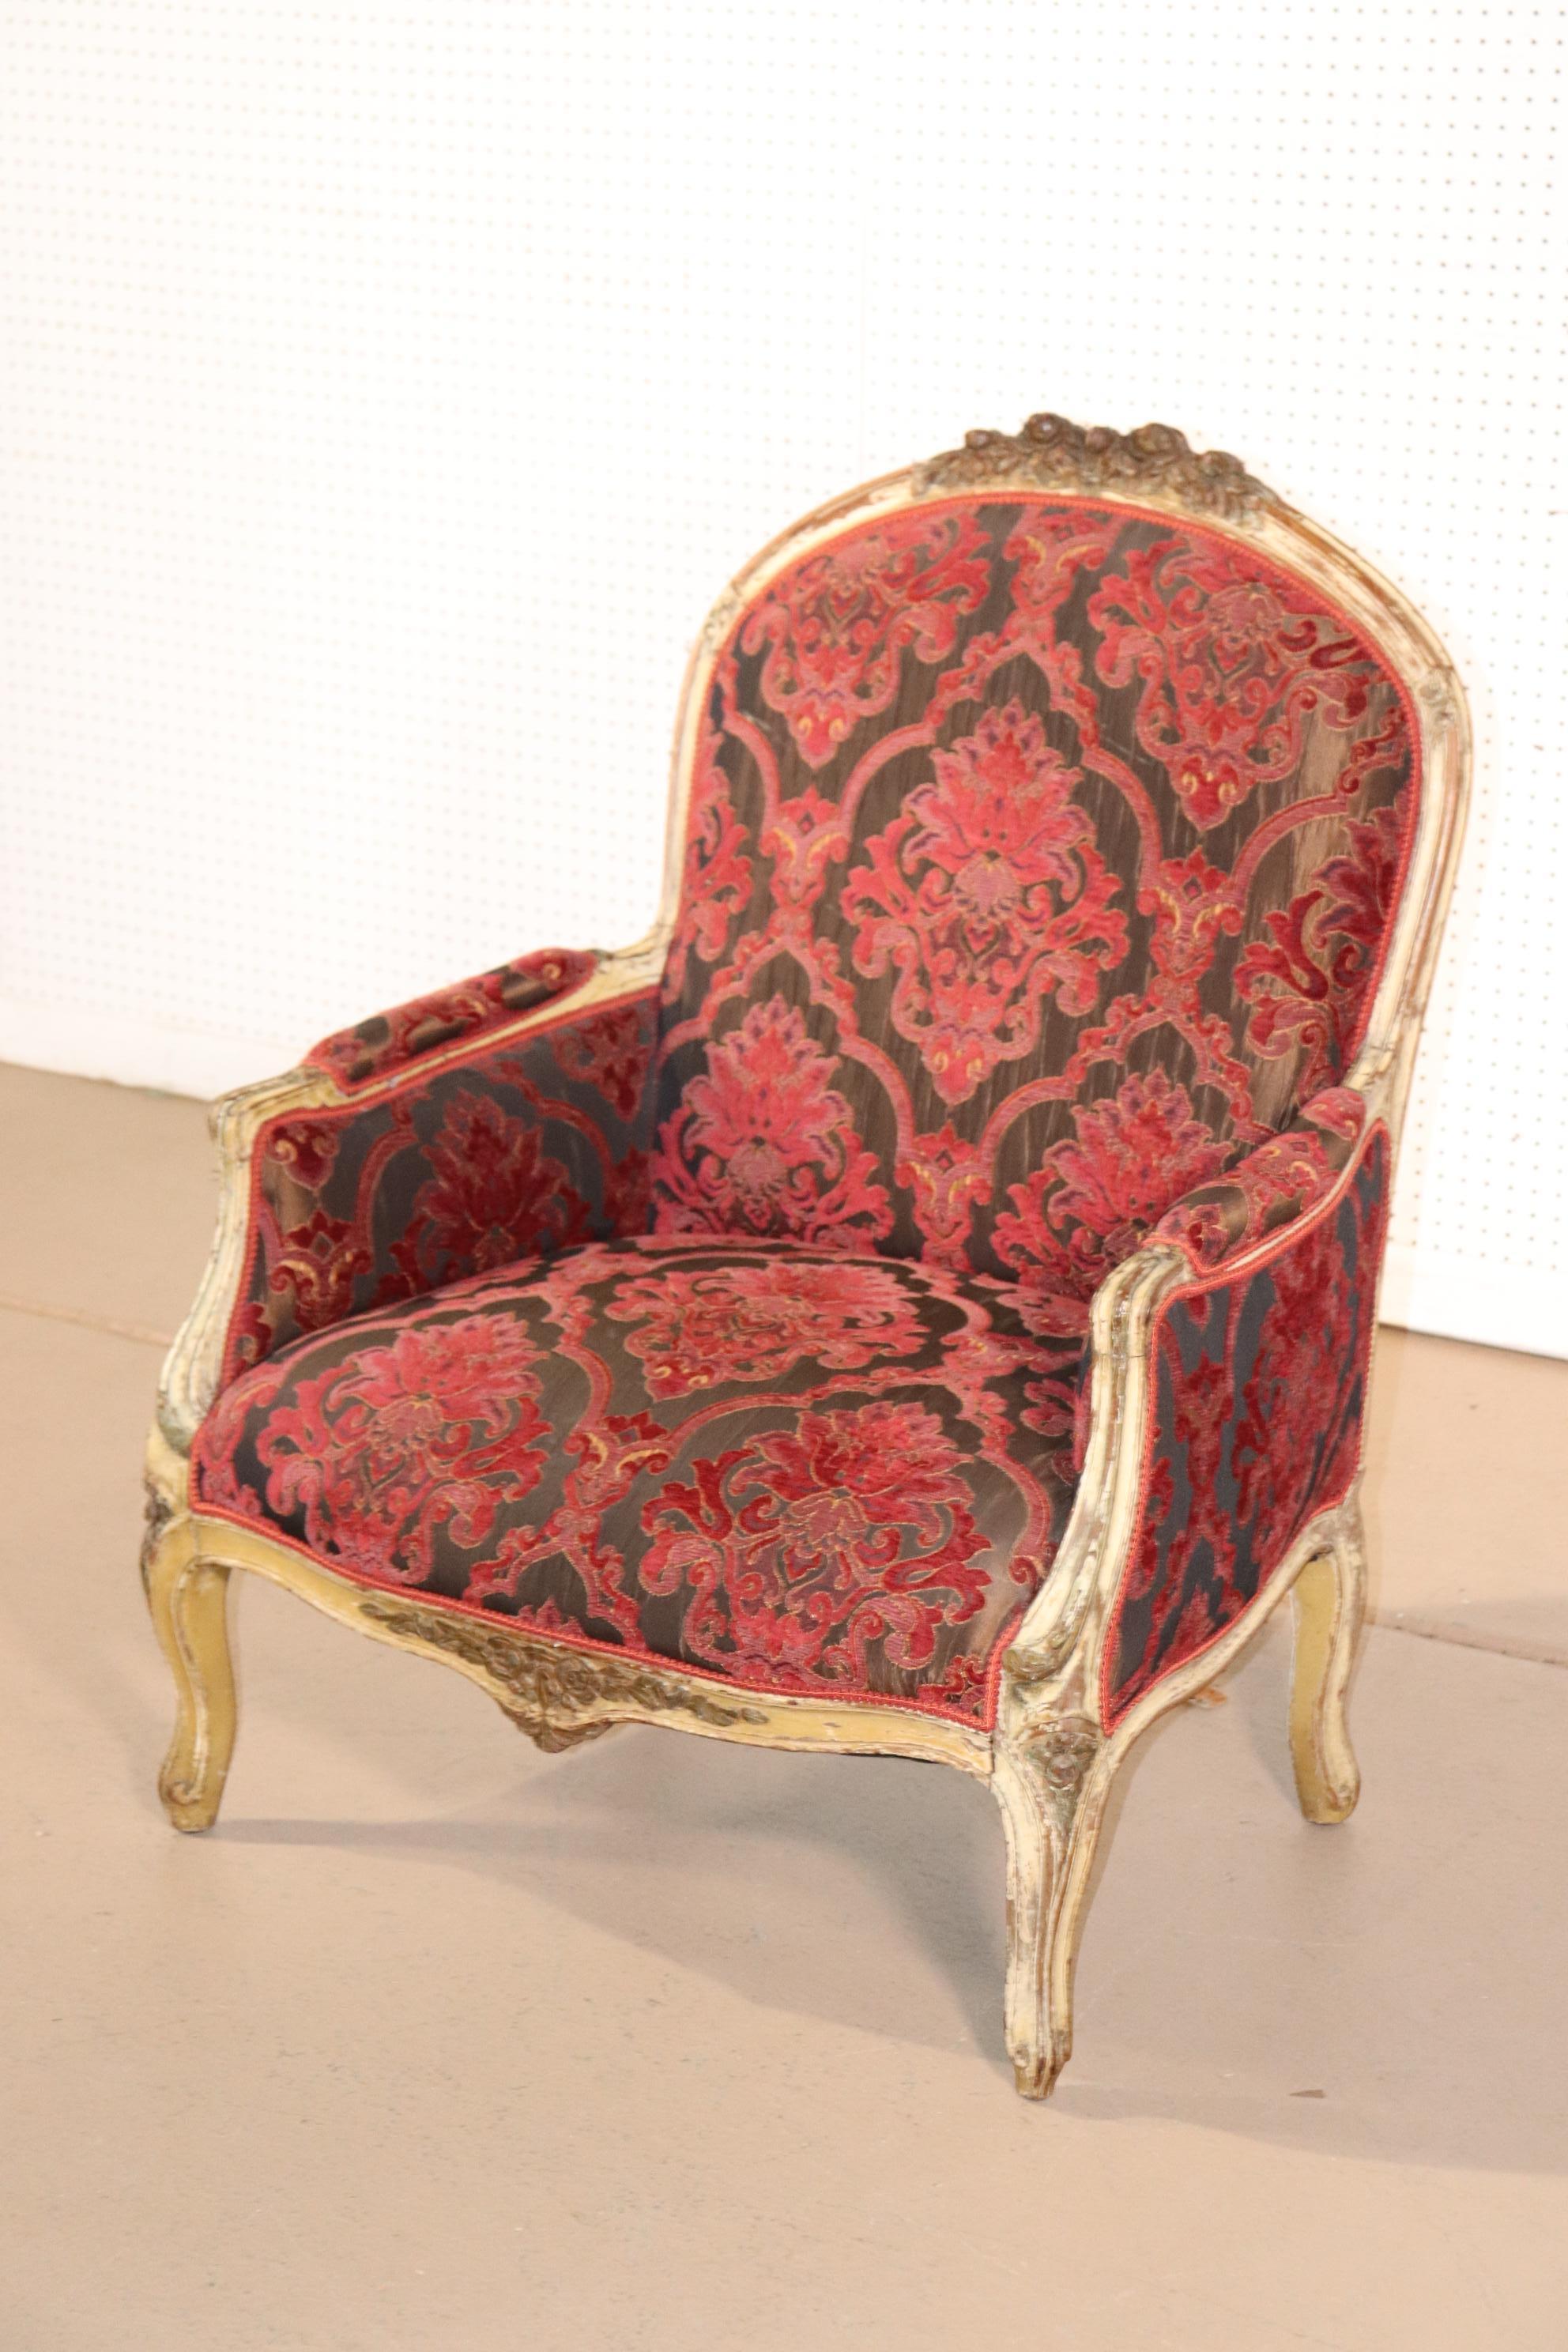 This is a beautiful time-worn paint decorated bergere. The chair is in very good antique condition. The chair measures 41 tall x 32 wide x 31 deep x 17 seat height.